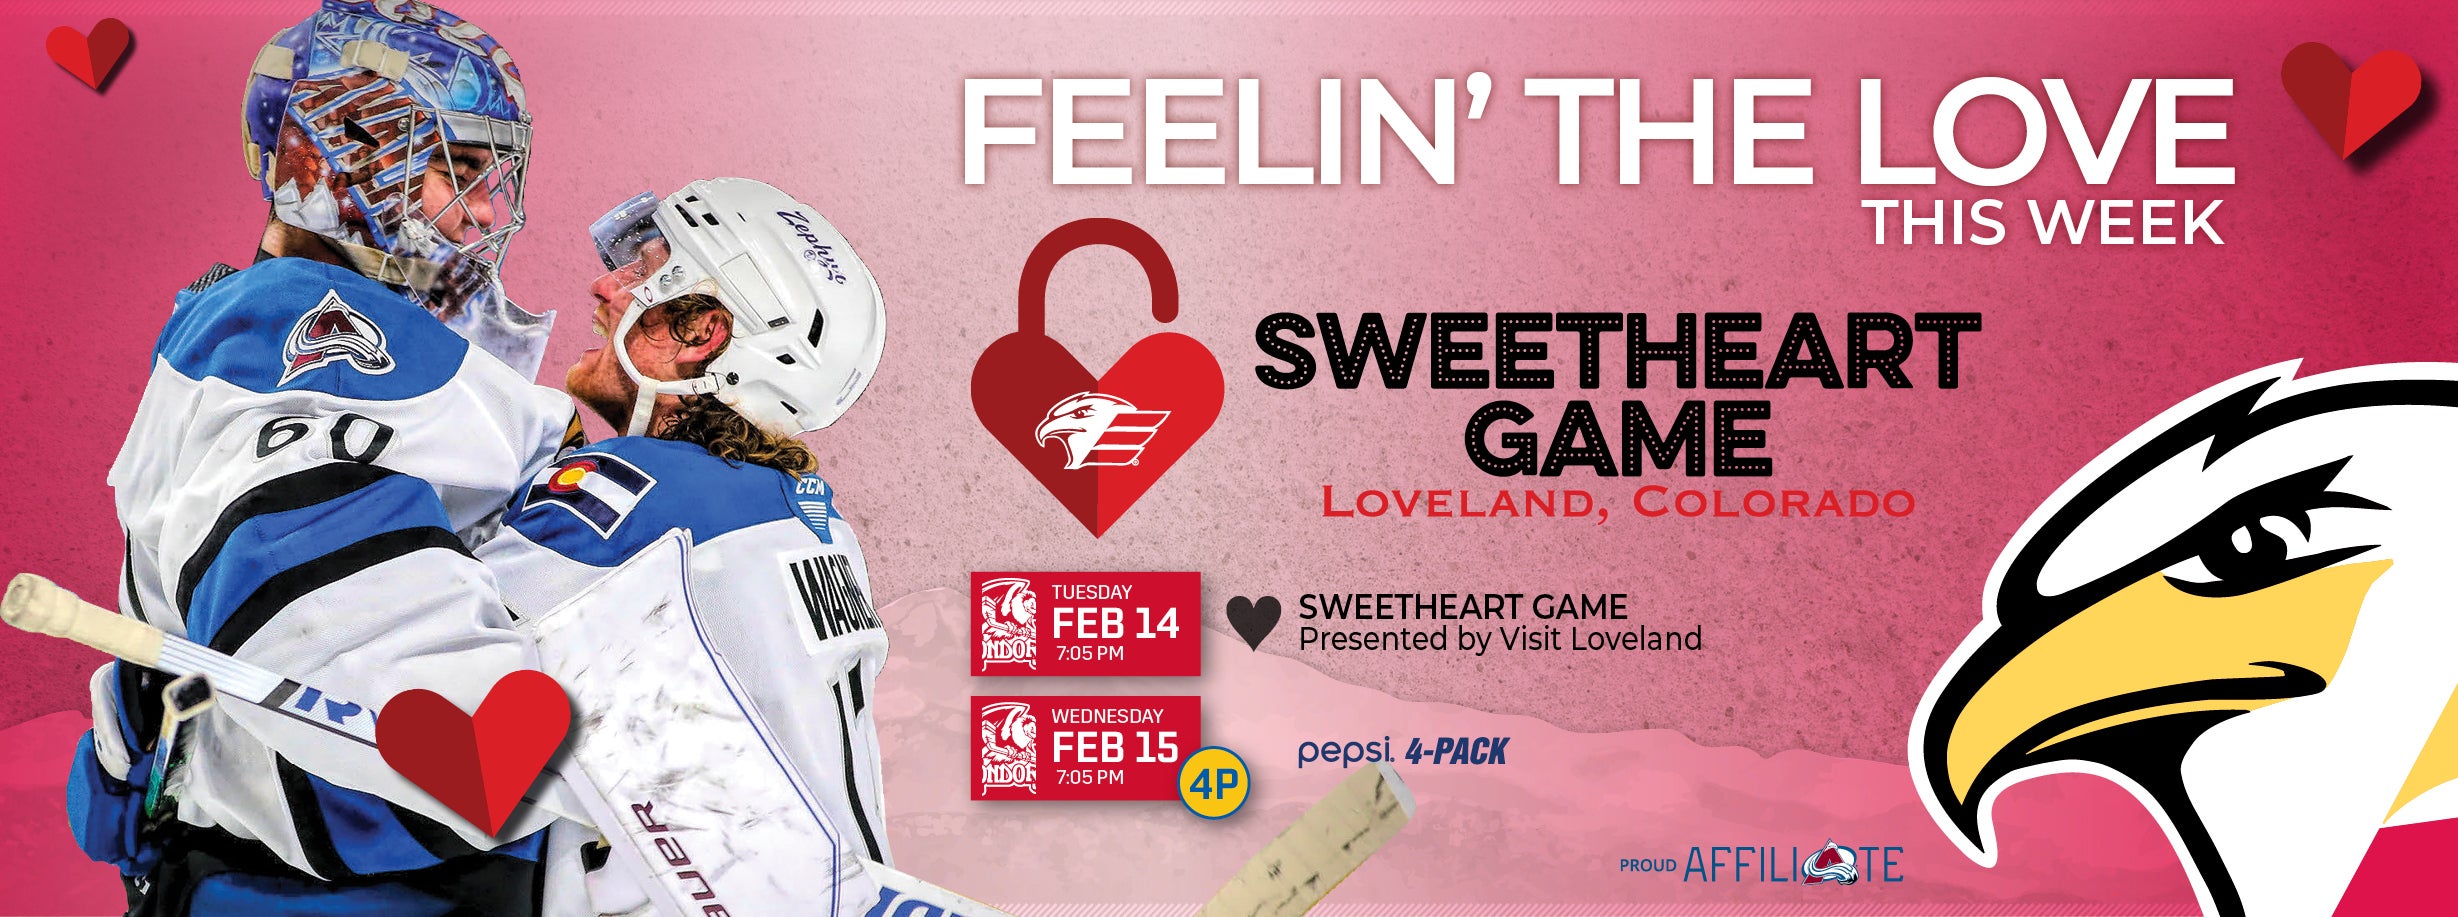 Colorado Hosts First-Ever Sweetheart Game Against Bakersfield